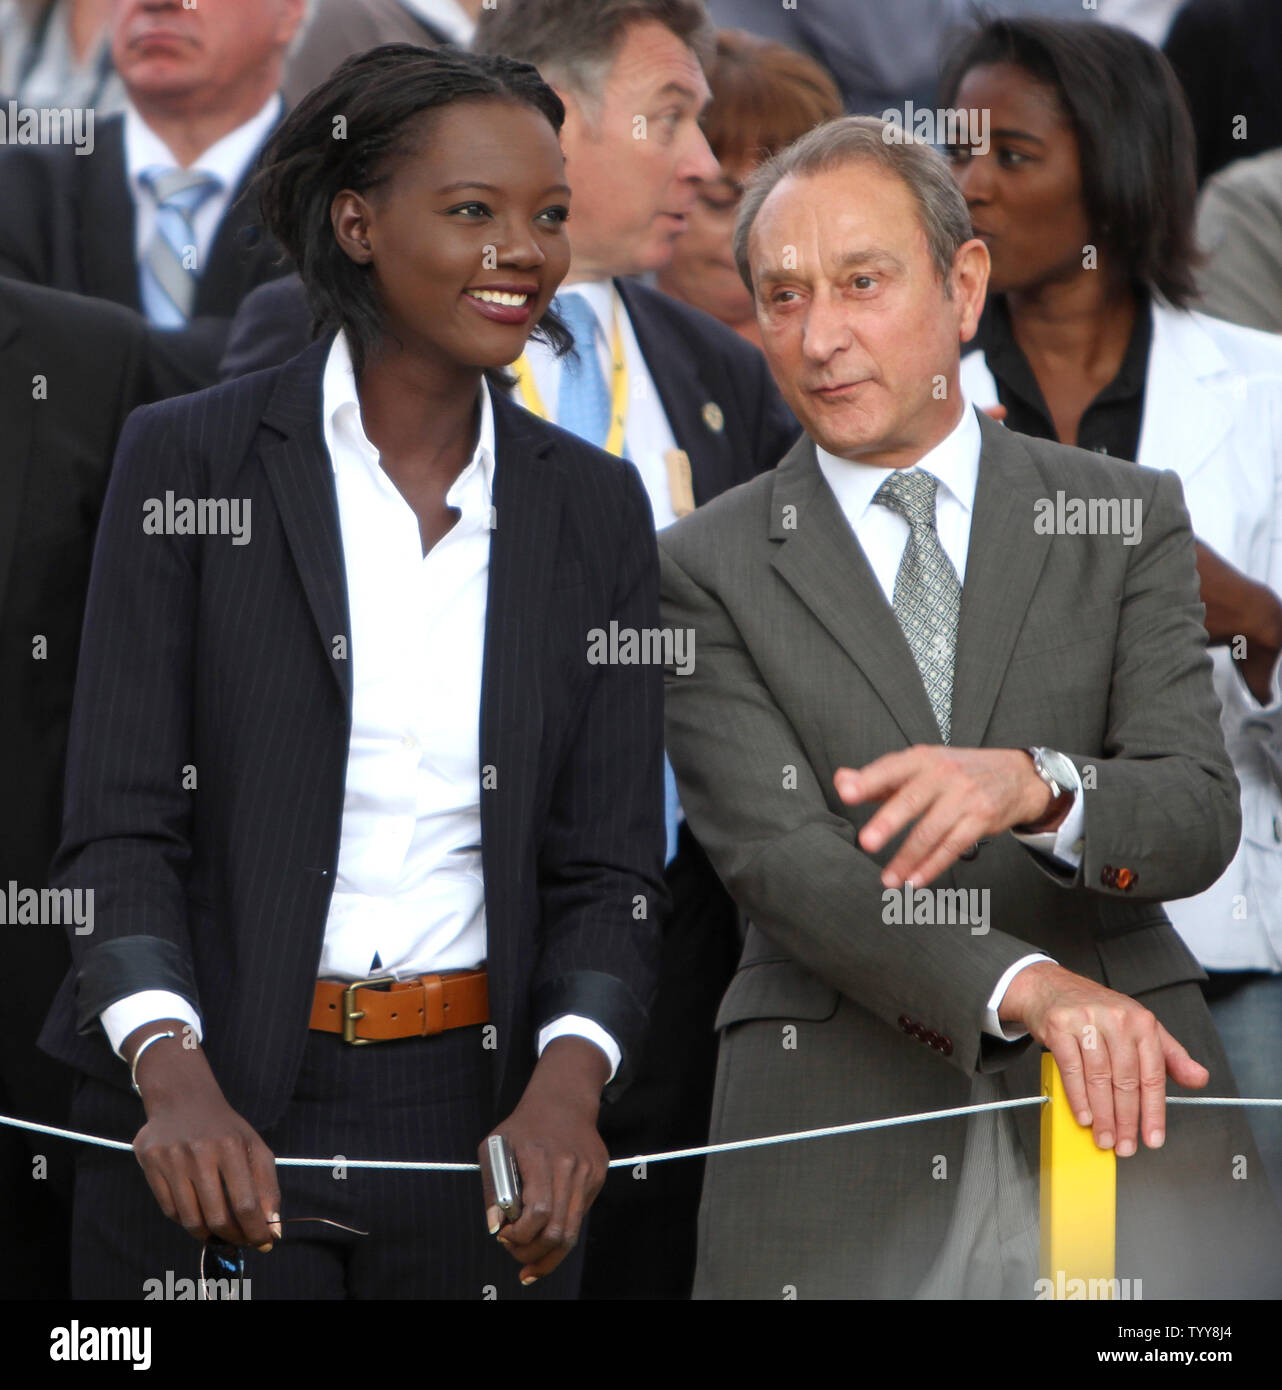 French Secretary of State for Sports Rama Yade (L) and Paris Mayor Bertrand Delanoe await the arrival of the riders on the Champs-Elysees during this year's Tour de France in Paris on July 25, 2010.  Spaniard Alberto Contador won the race, his  third Tour de France title in the last four years.   UPI/David Silpa Stock Photo